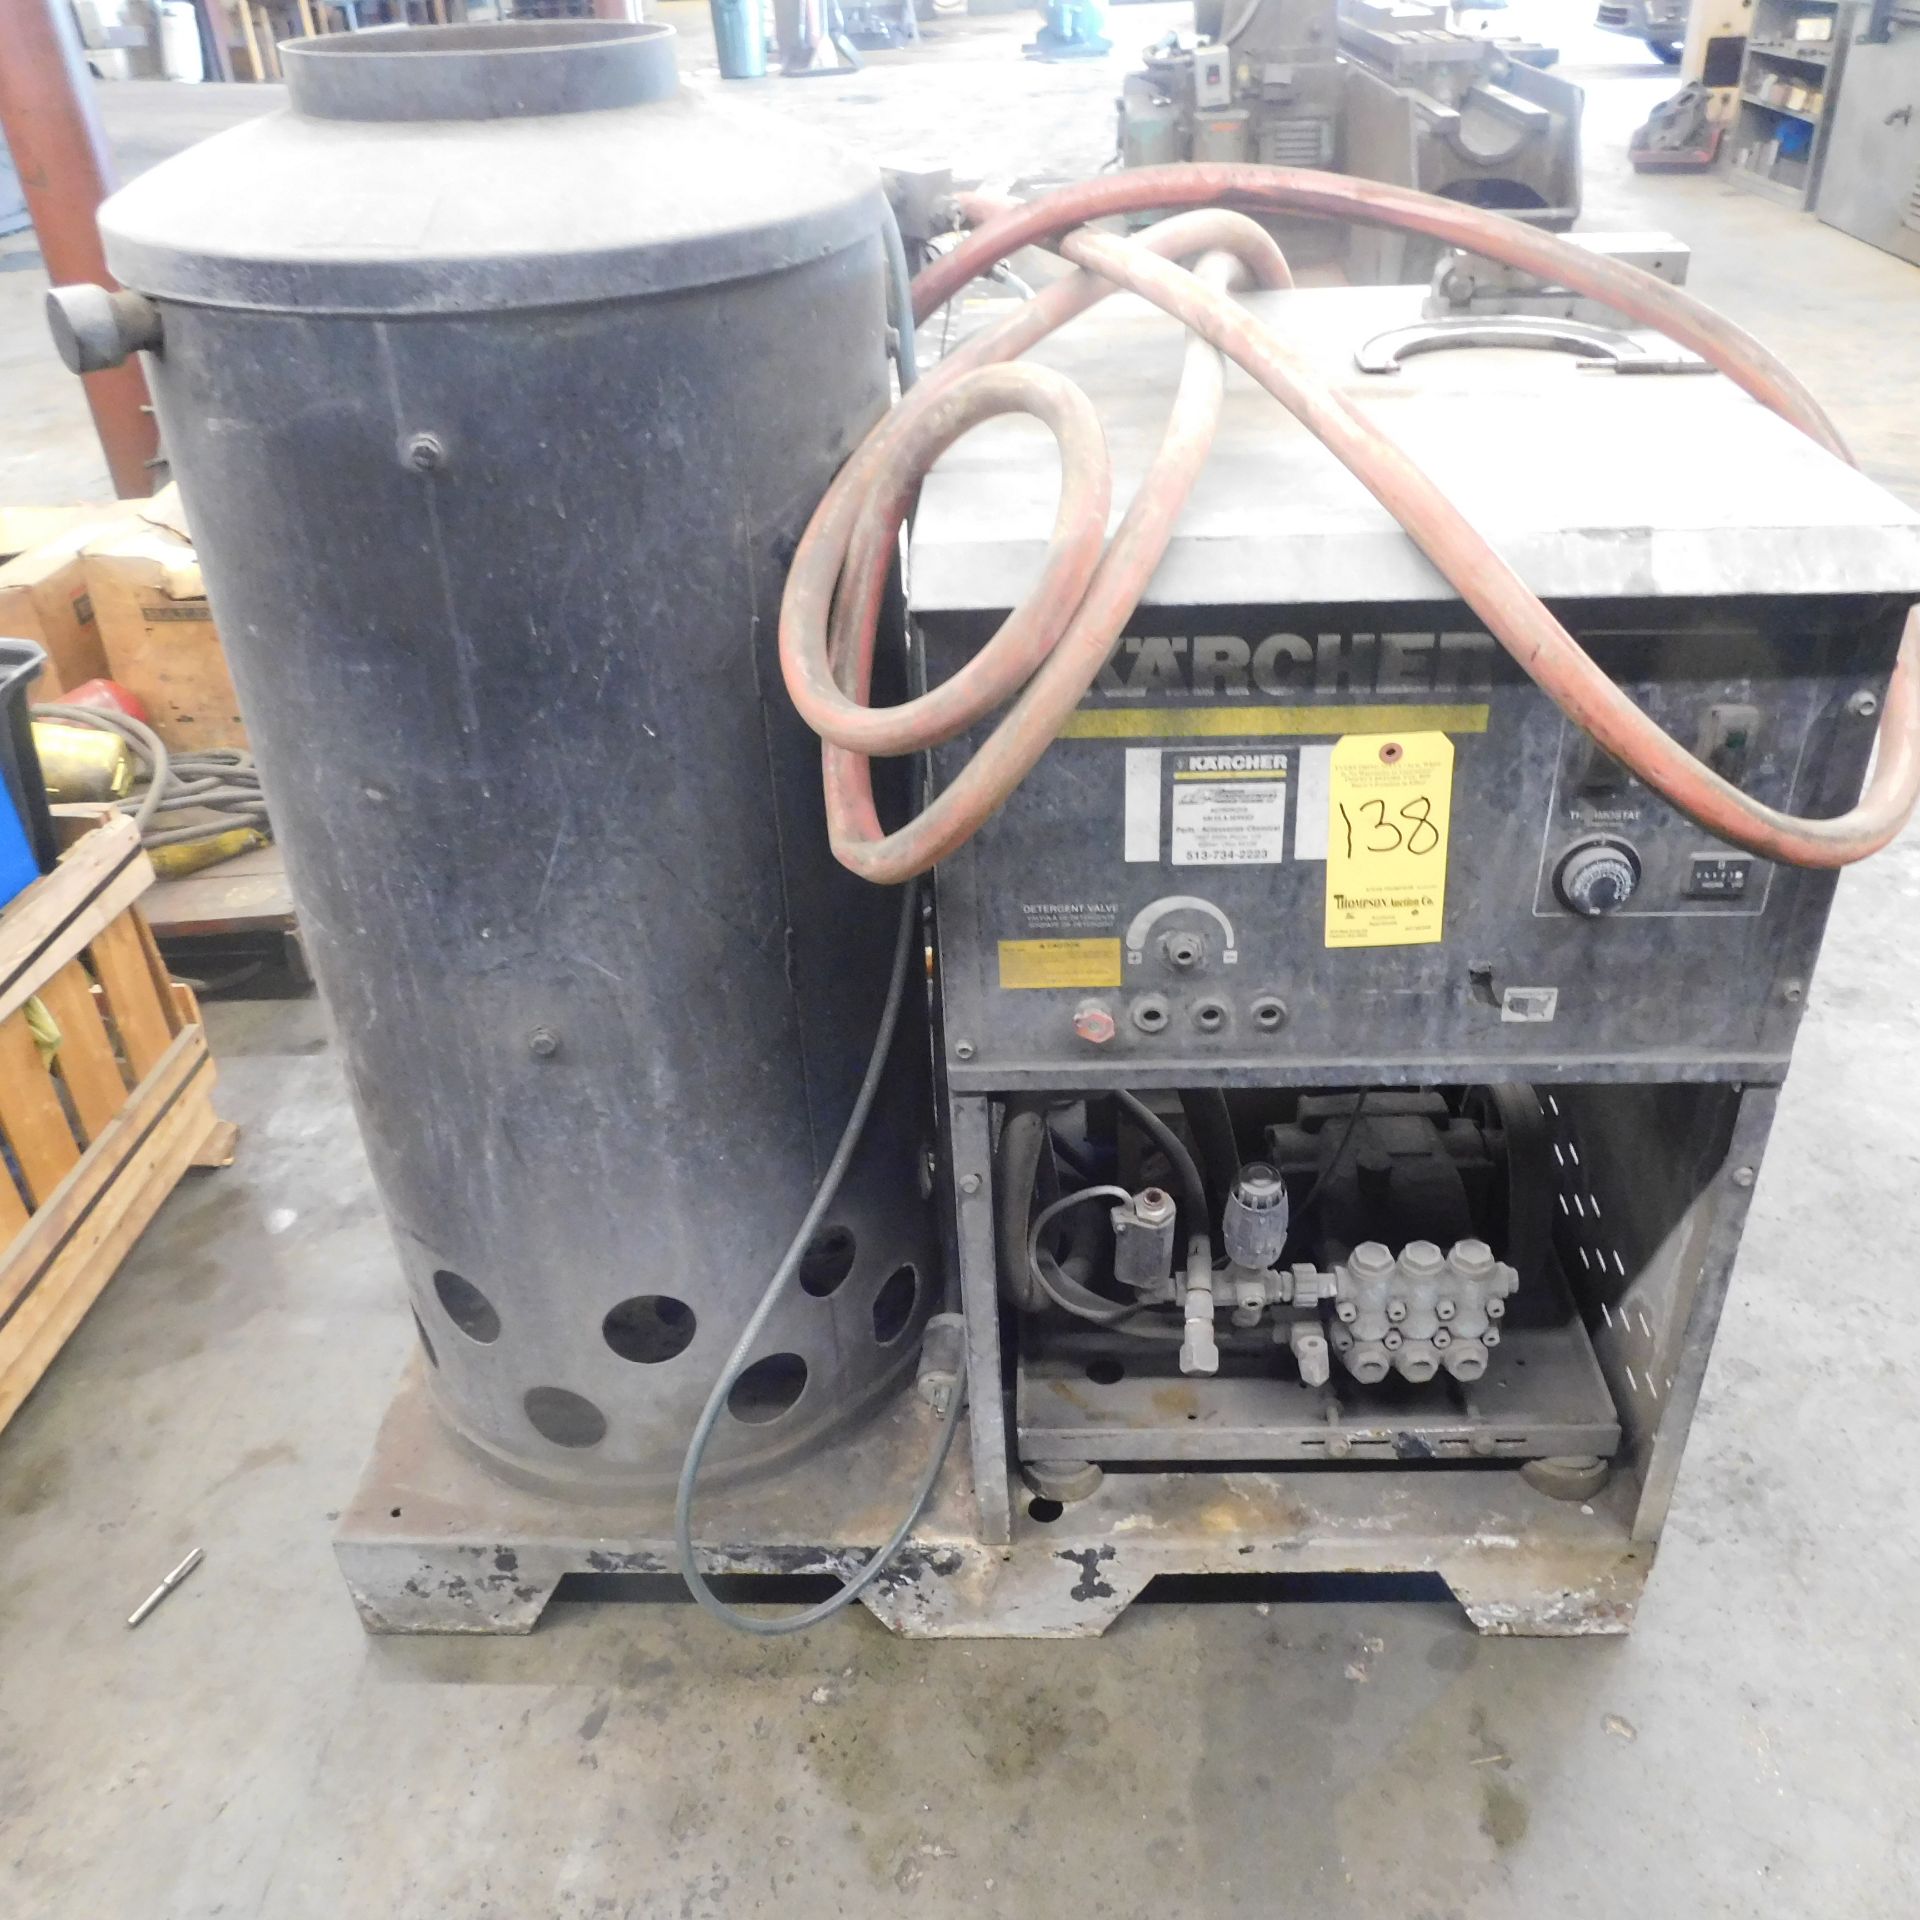 Karcher Hot Water Pressure Washer, Nat. Gas, Model 1.575.704.0, s/n K1105-111485, 2,000 PSI, 4.2 GPM - Image 3 of 3